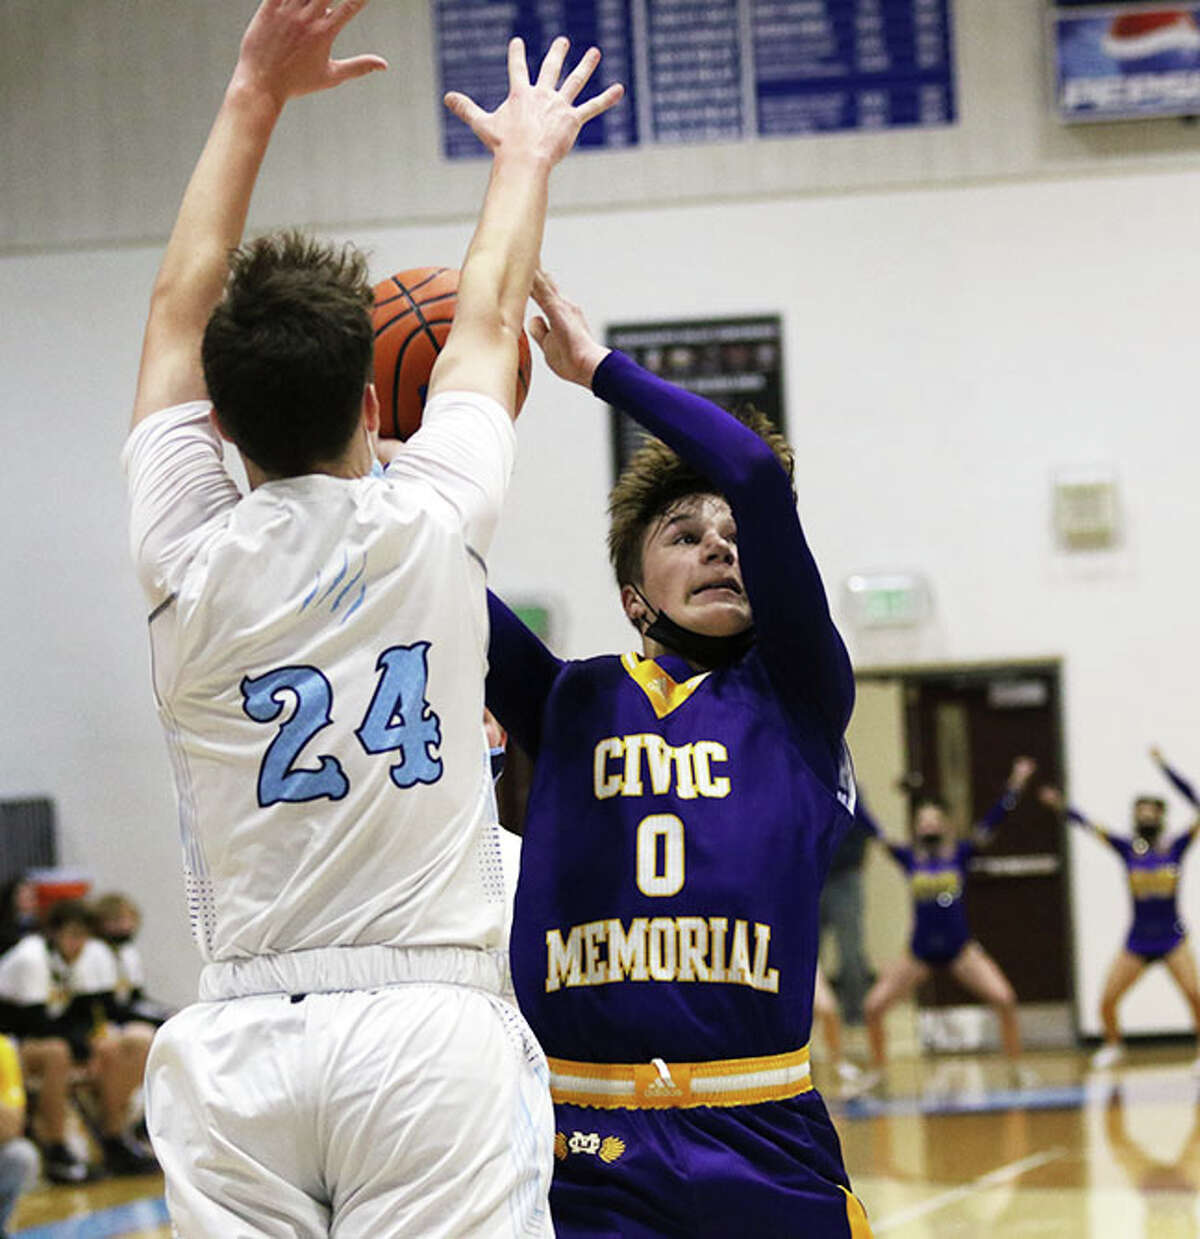 CM freshman Adam Ogden (0) shoots over Jersey's Ayden Kanallakan during a MVC game in Jerseyville on Dec. 3. On Saturday, Ogden hit six 3-pointers and scored a career-high 18 points in the Eagles win over Triad at the Litchfield Tourney.